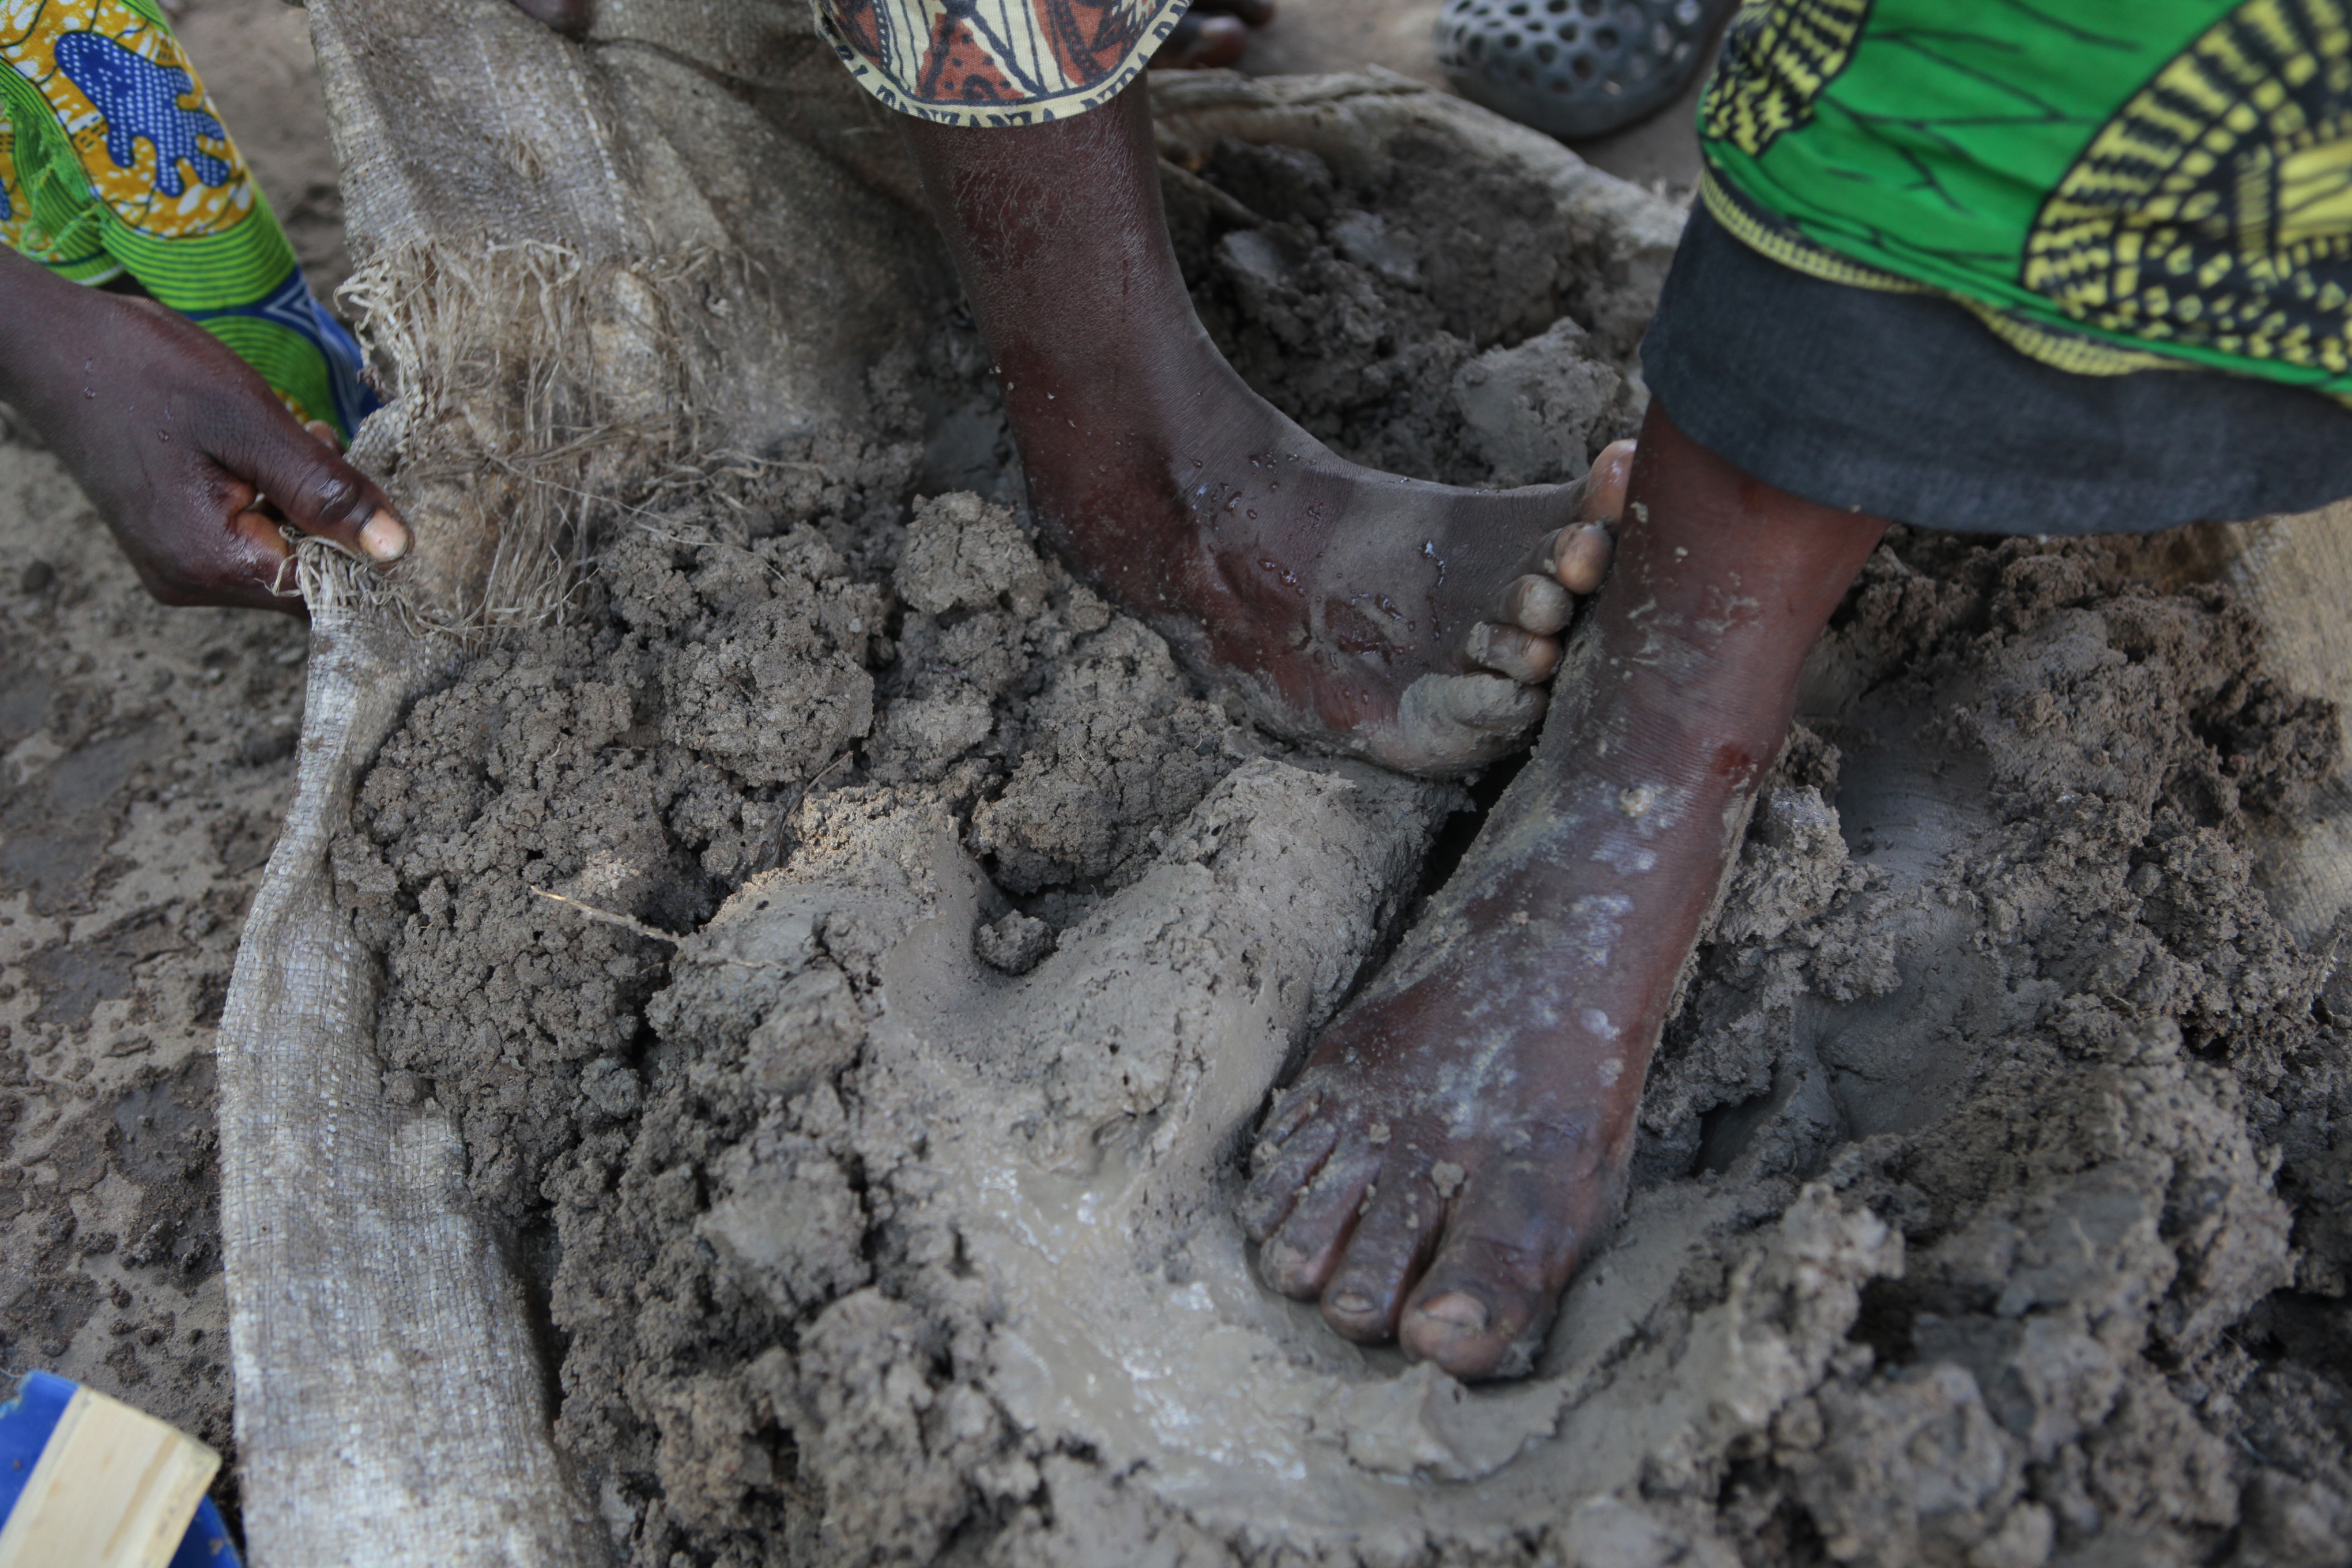 Women of the Gideon village in Malawi mold clay into portable clay stoves with their hands and feet.